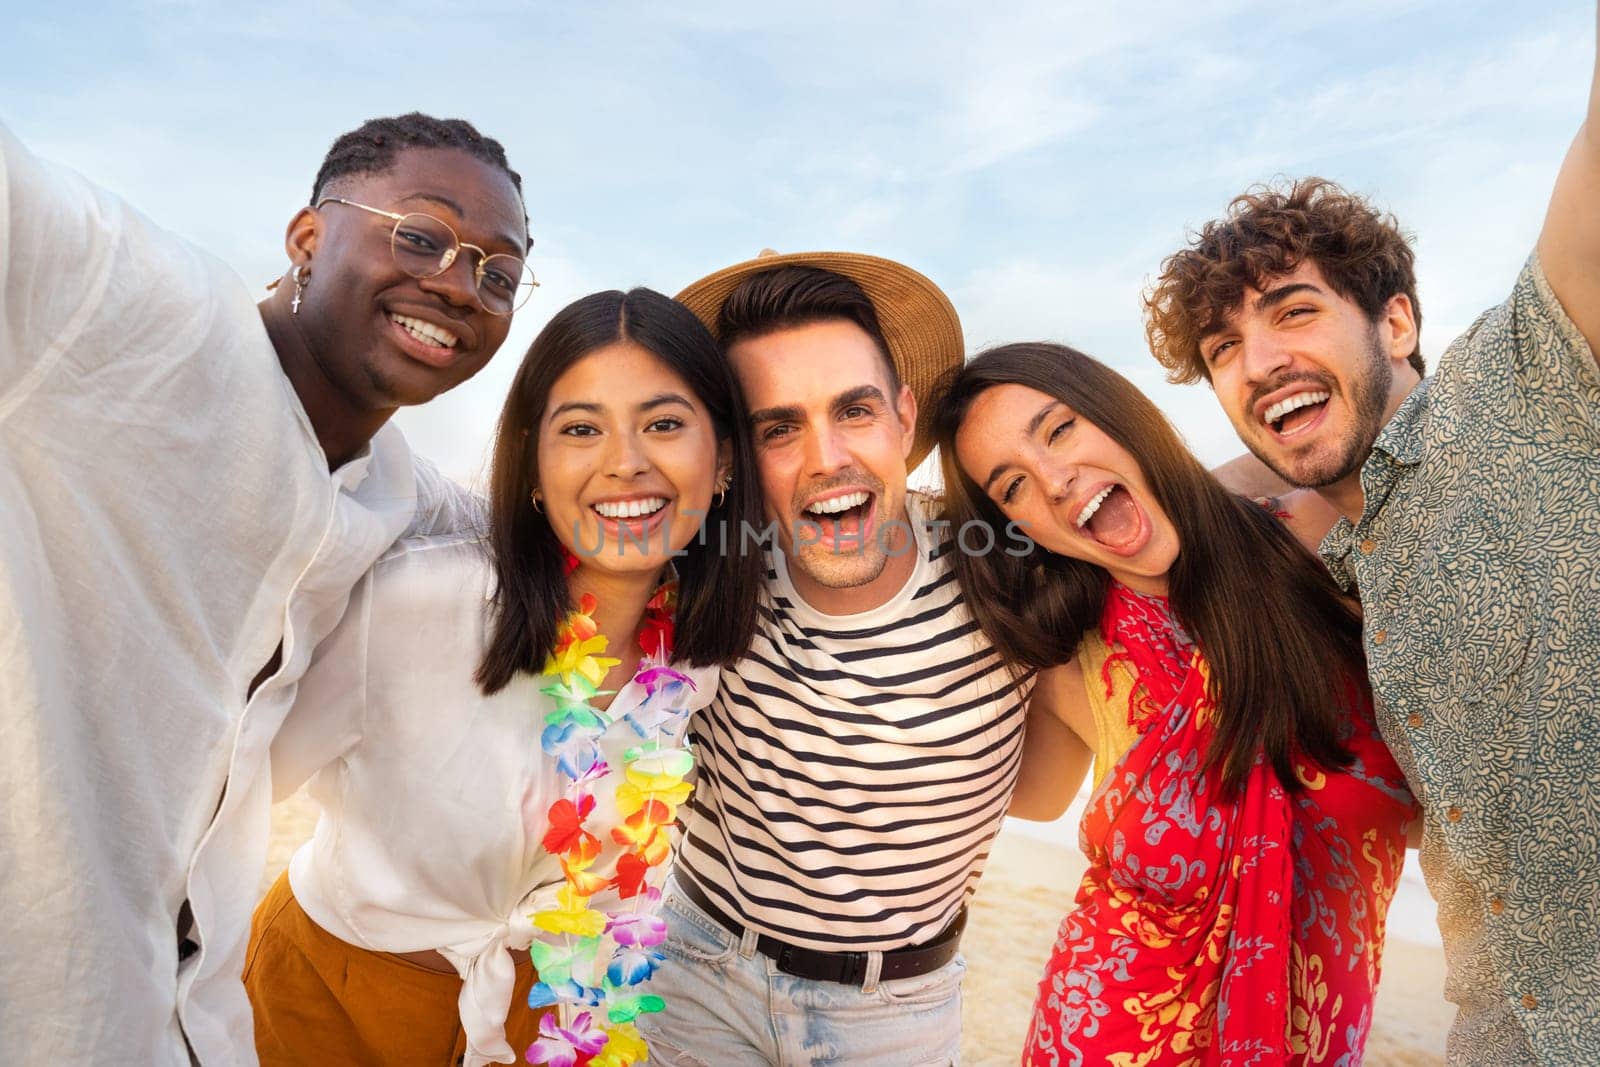 Happy, smiling group of multiracial friends relaxing at the beach having fun together looking at camera. Summer vacation and friendship concept.